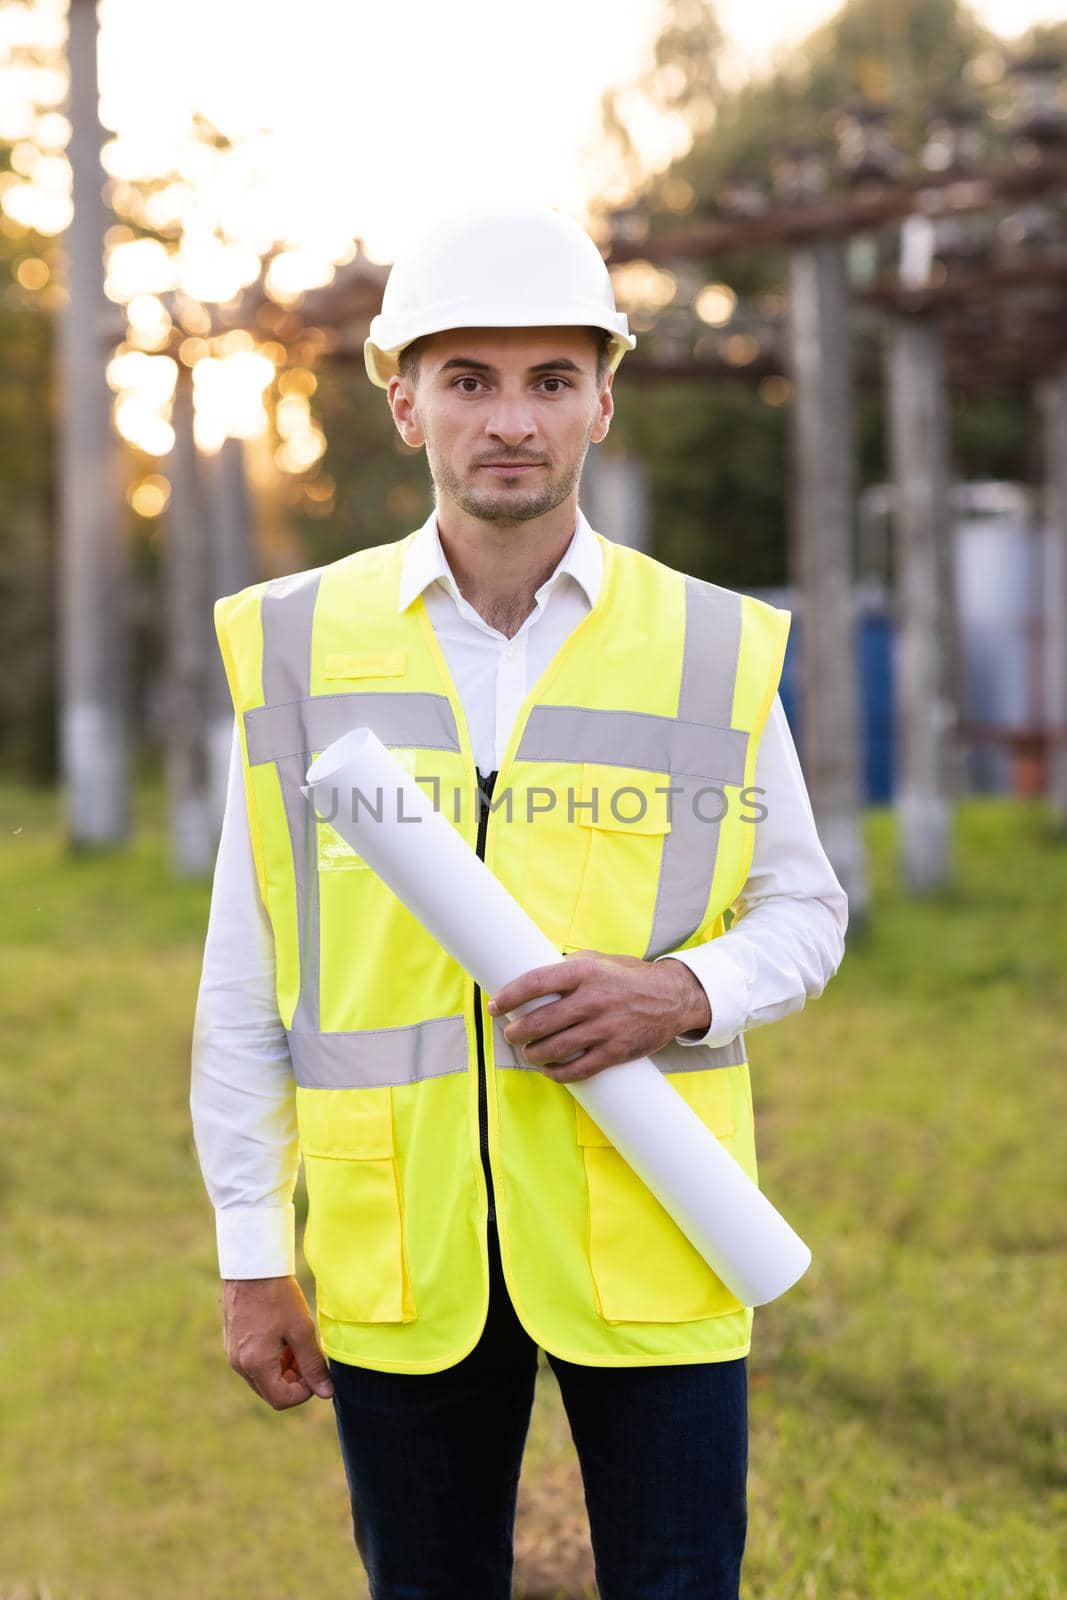 Successful Contractor Investor Architectural Engineer Wearing Hard Hat and Safety Vest Standing on a Commercial Building Construction Site, Crosses Arms Confidently Hold Blueprint in his Hand by uflypro